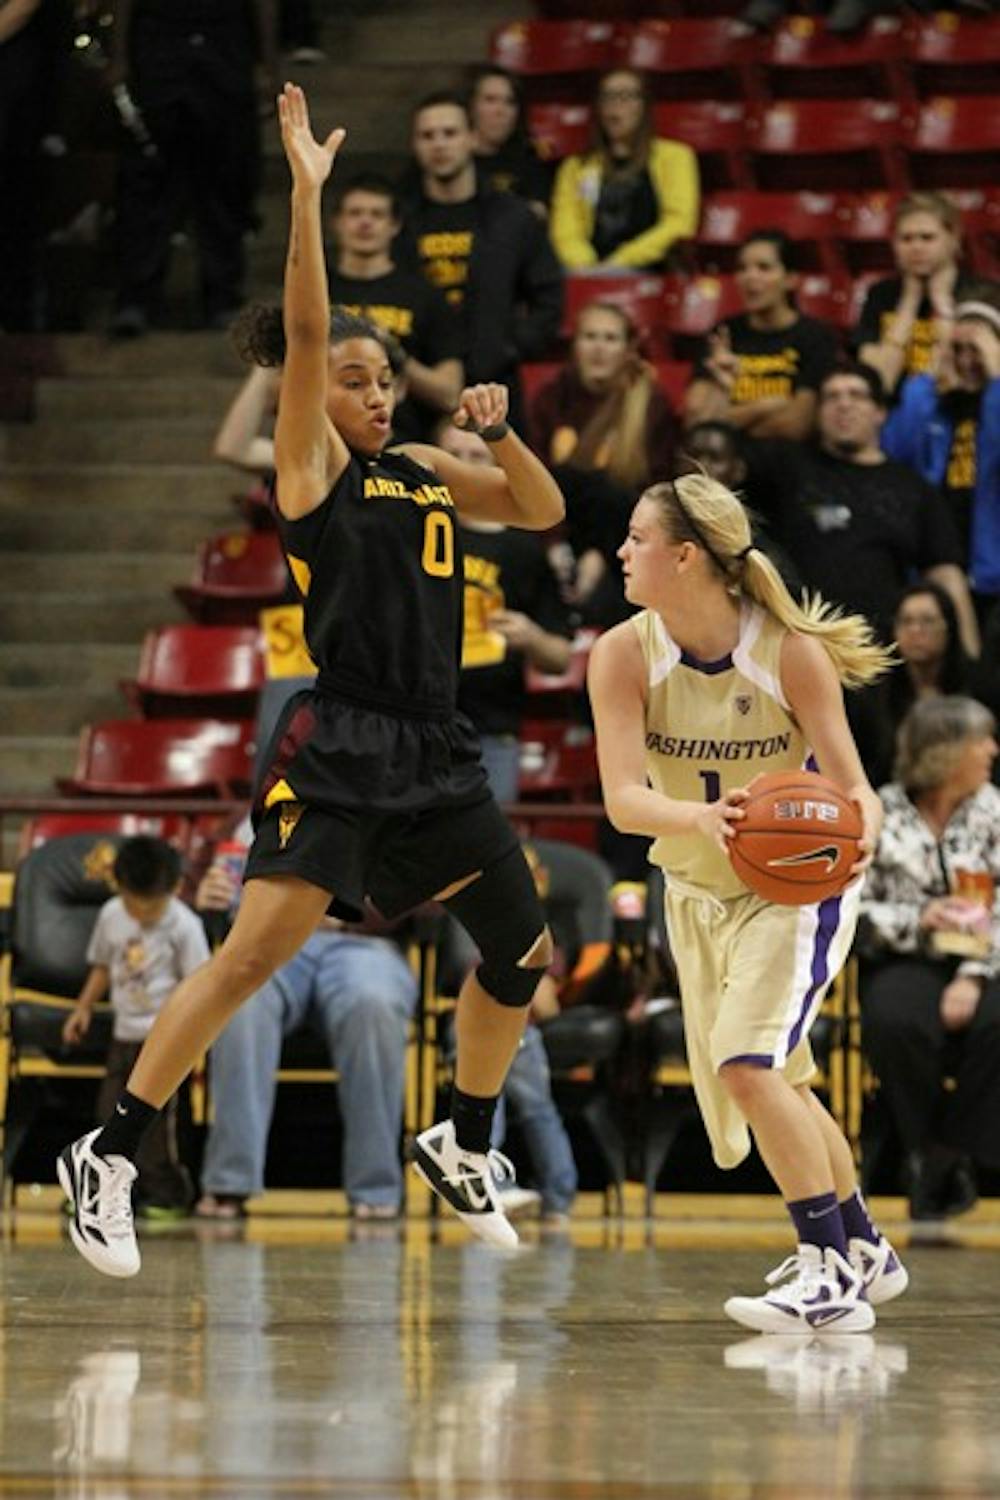 Senior Olivia Major plays animated defense in a game against Washington on Feb. 16. Major led ASU with 14 points as the Sun Devils defeated the Huskies 47–41. (Photo by Sam Rosenbaum)